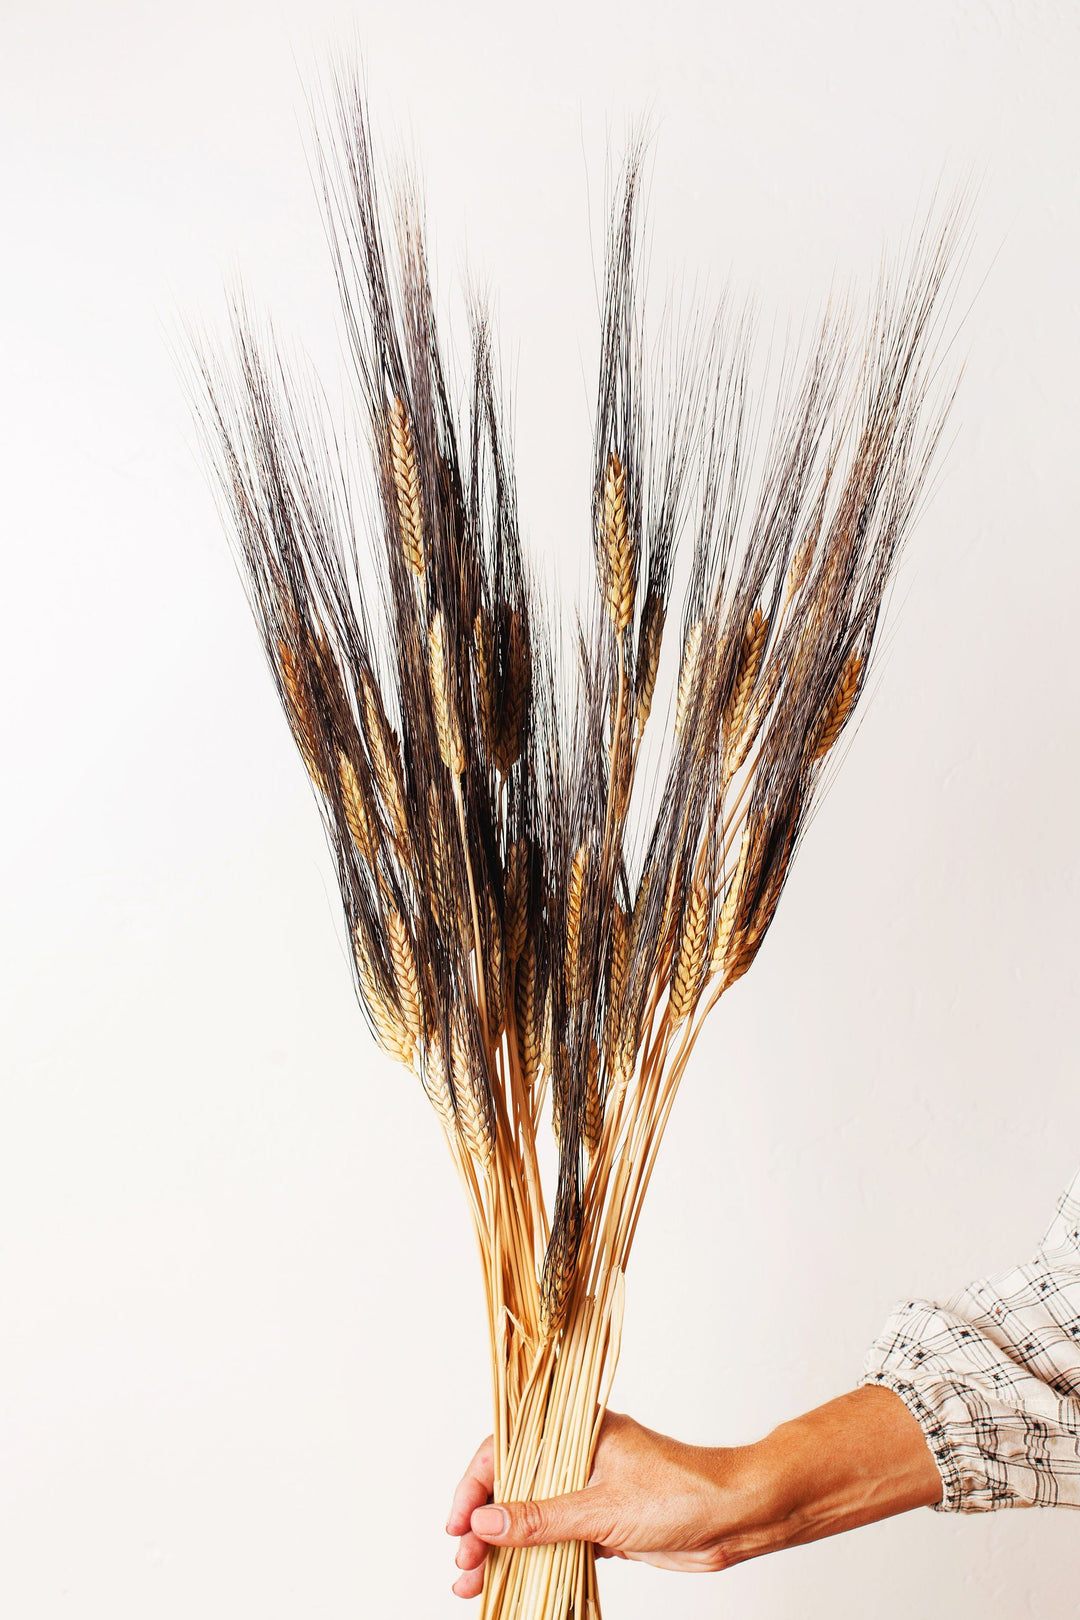 Idlewild Floral Co. Dried Black Bearded Wheat